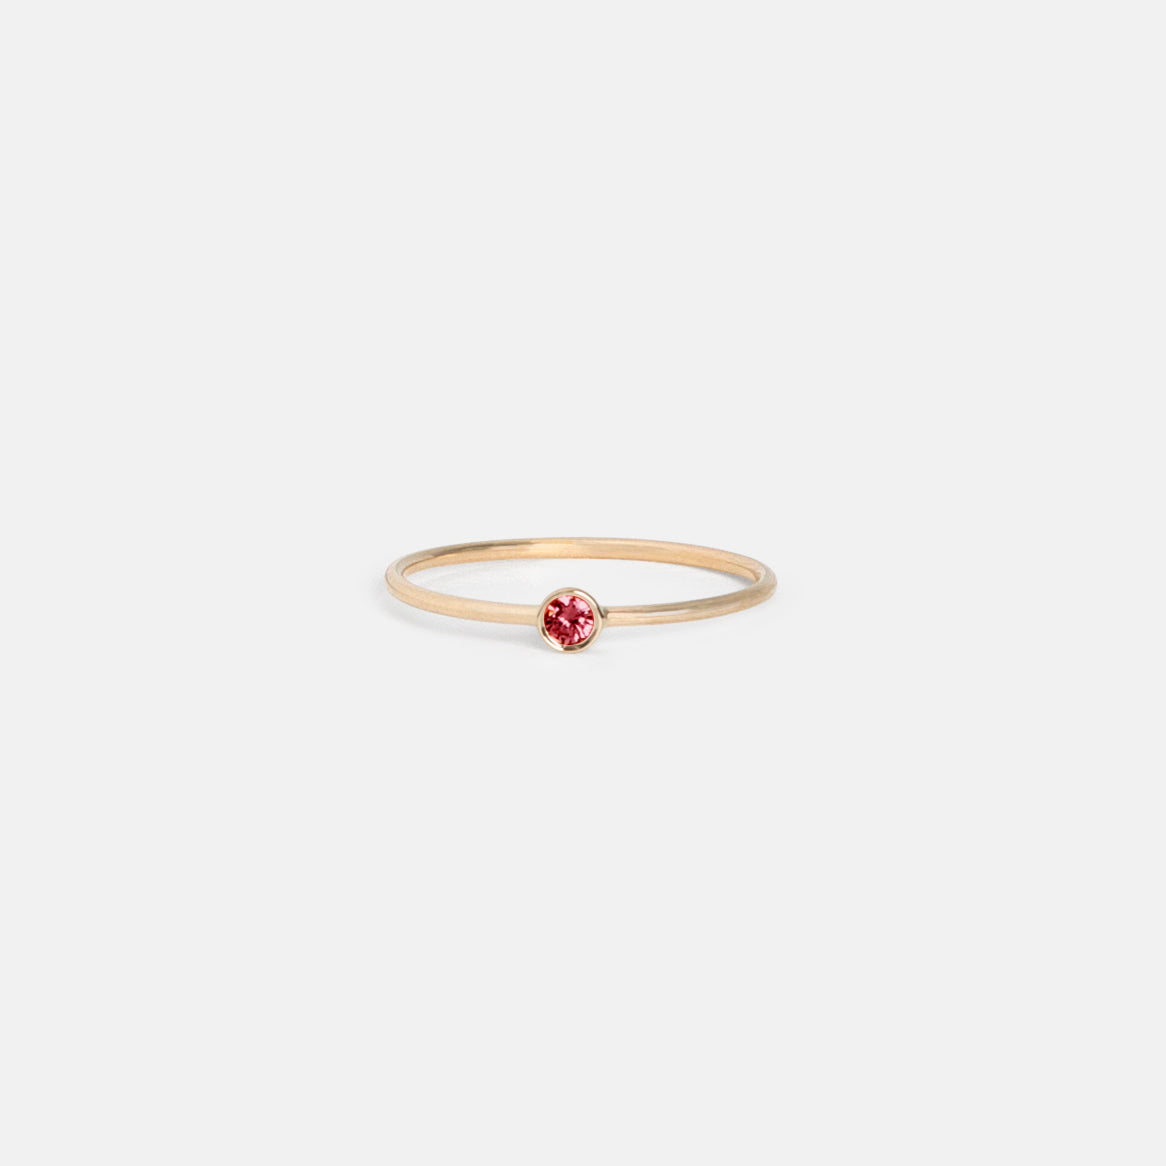 Stacking Large Kaya Ring in 14k Gold set with Ruby by SHW Fine Jewelry in NYC